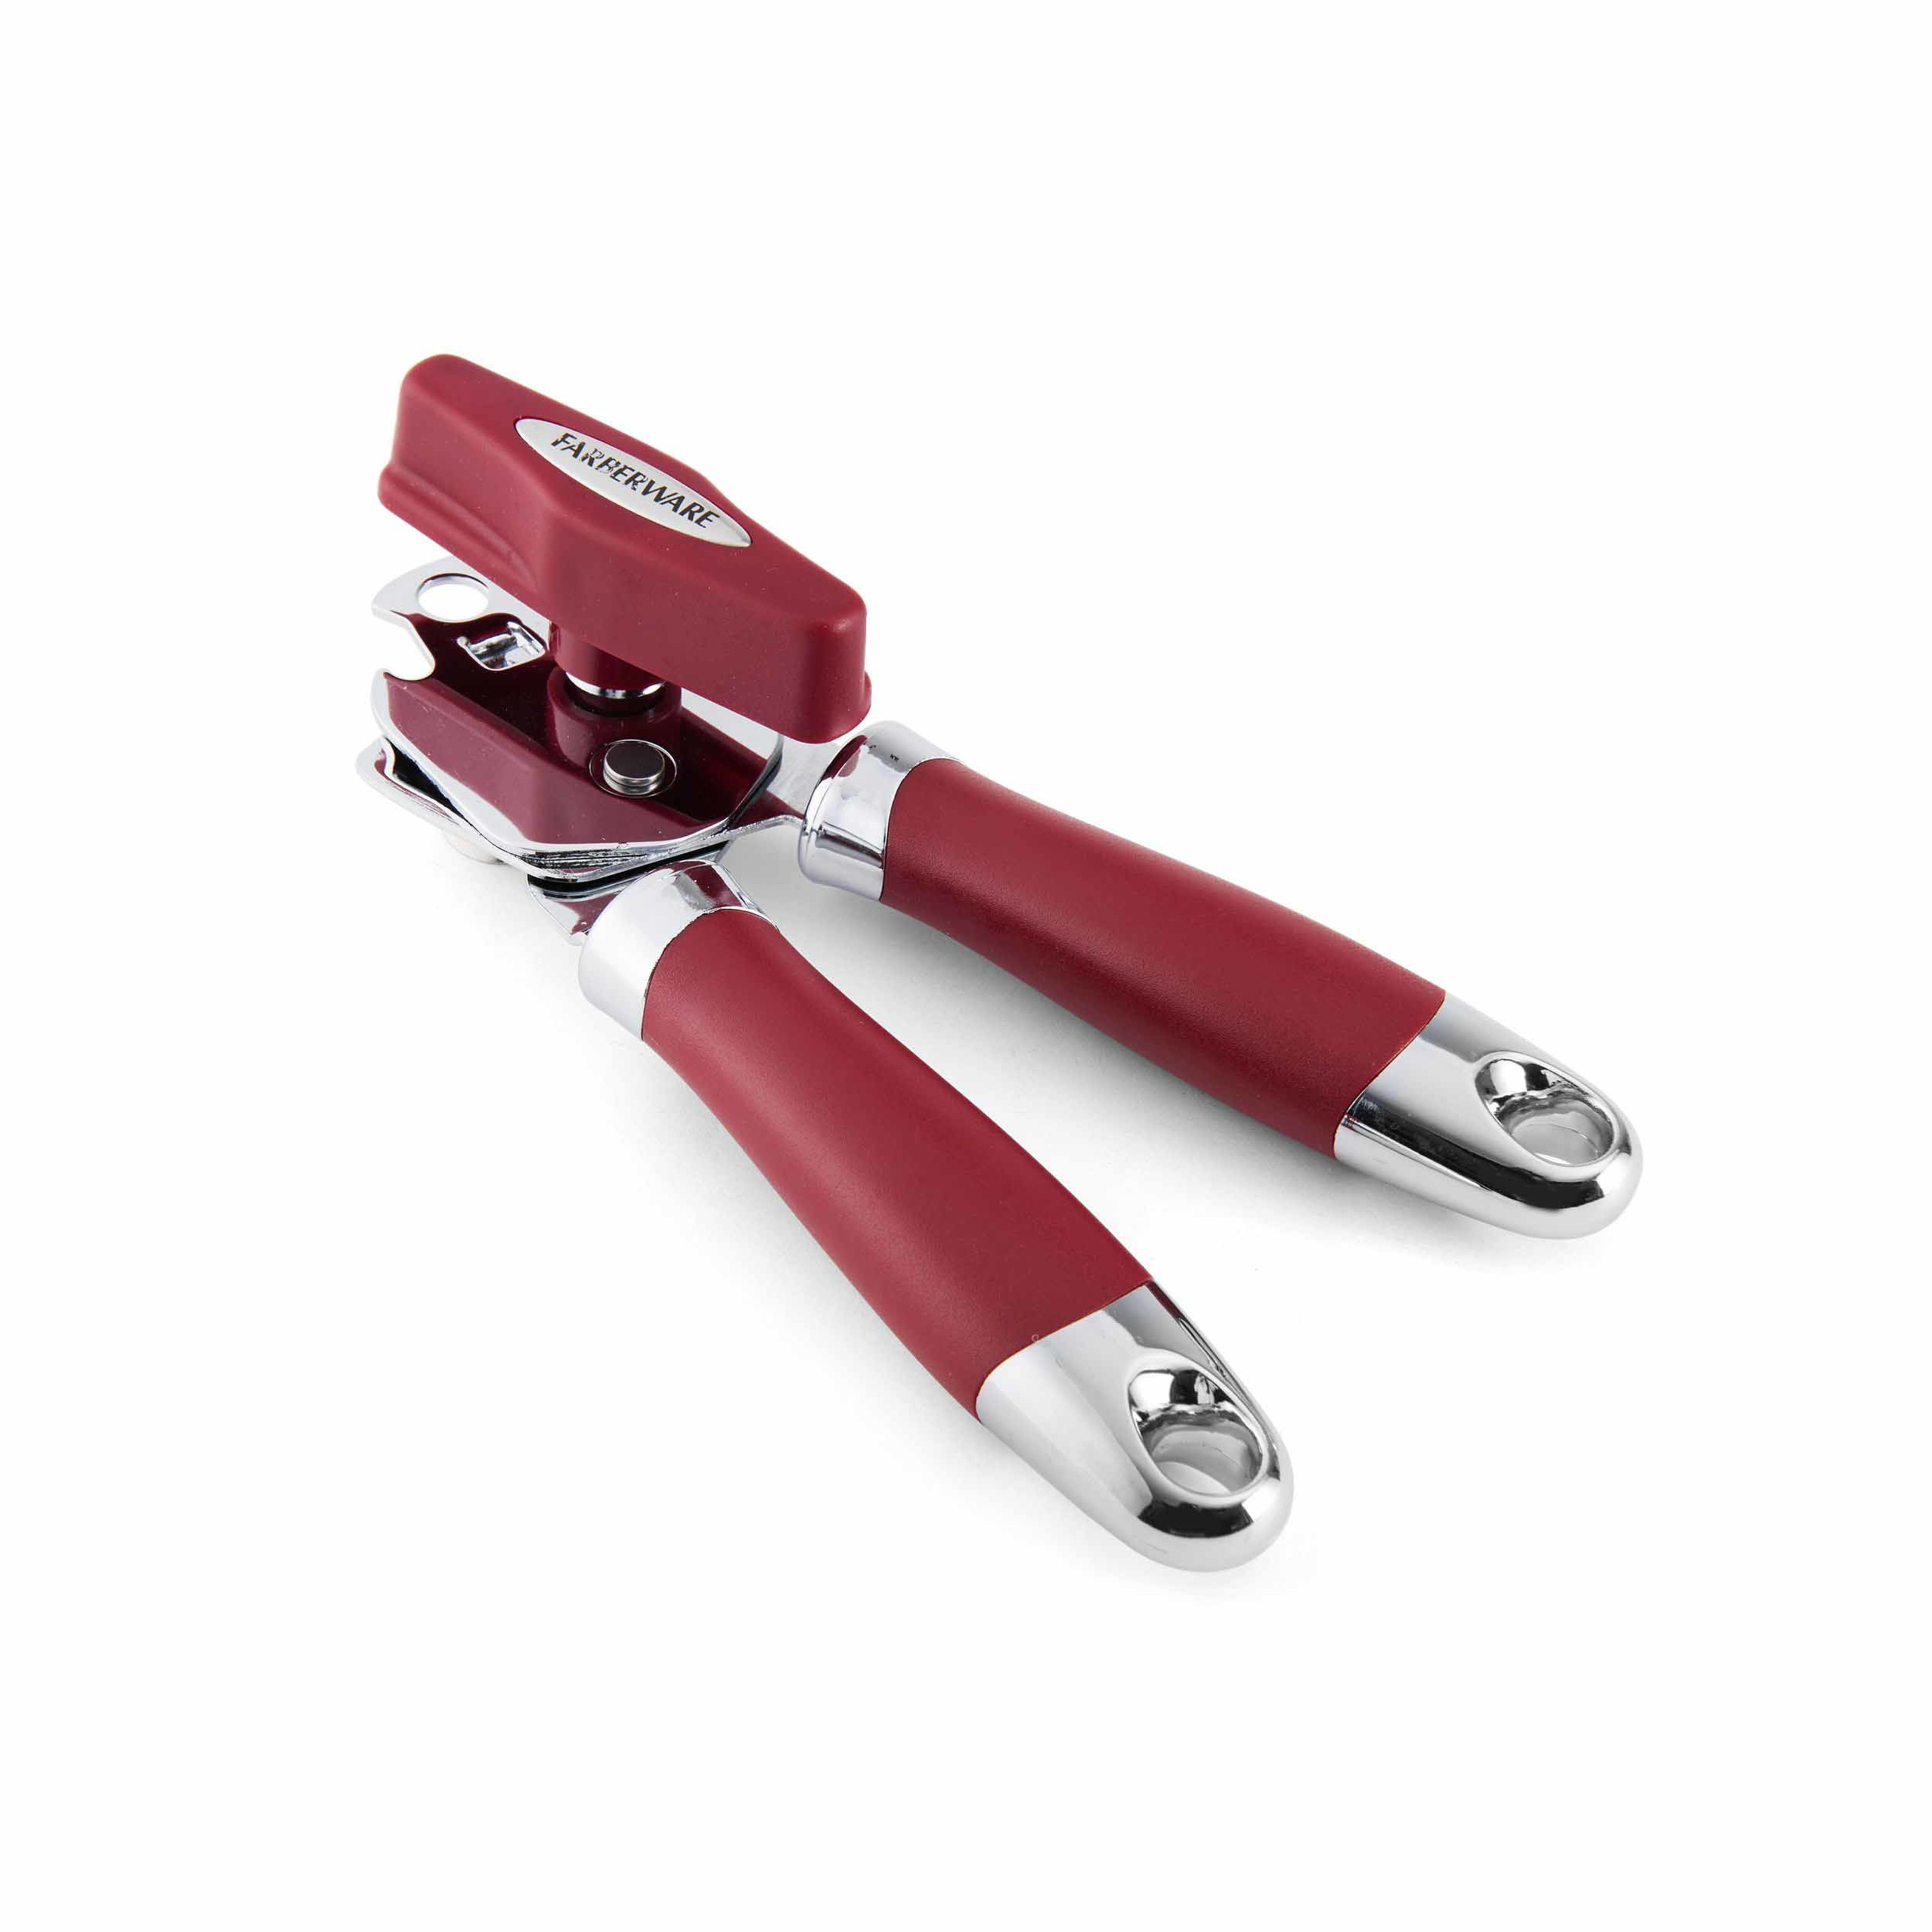 Farberware Pro 2 Can Opener Red One Size